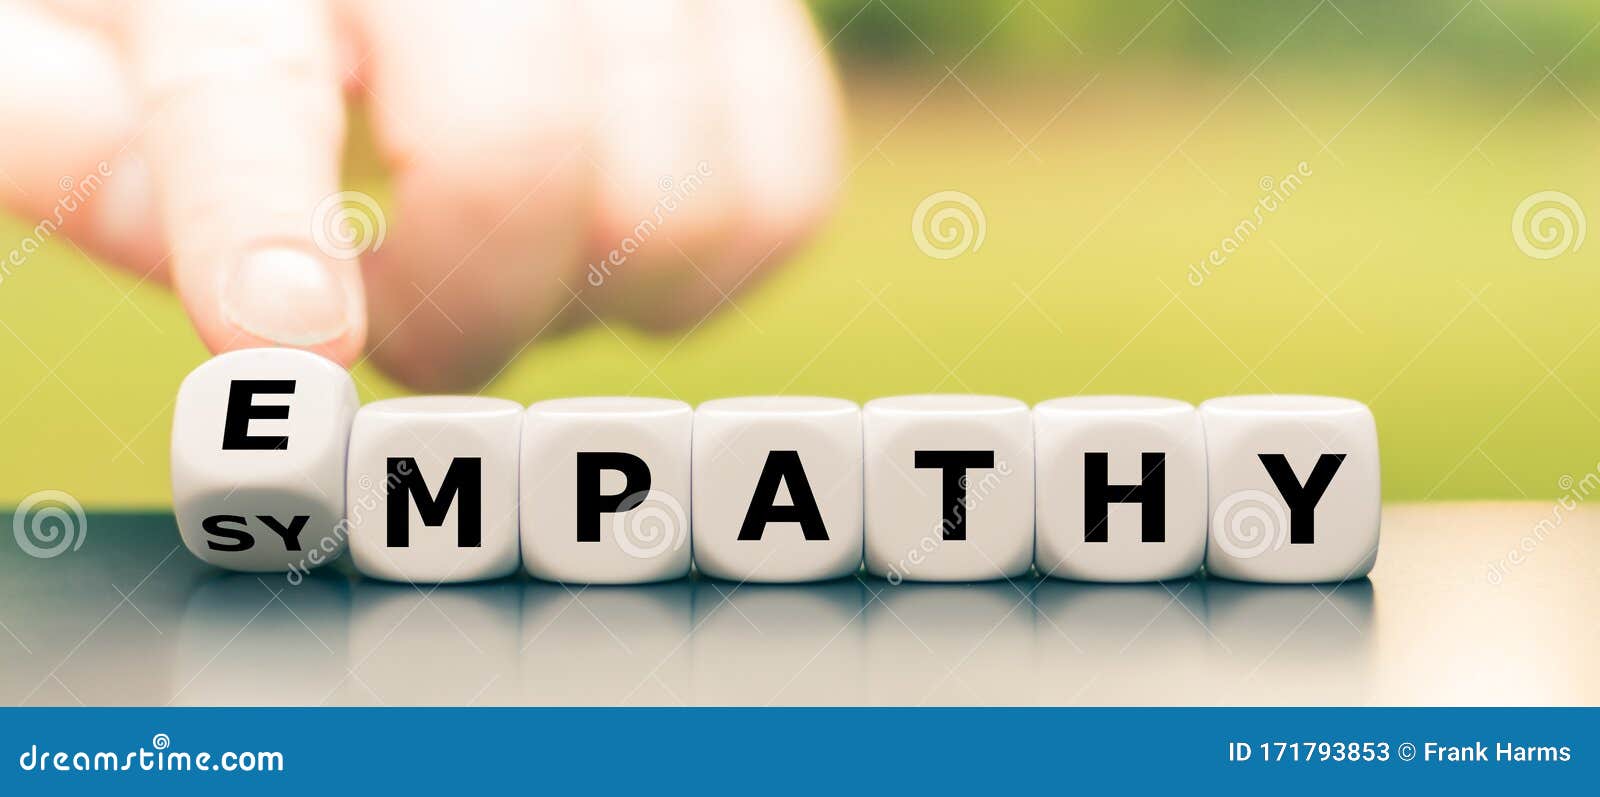 hand turns dice and changes the word `sympathy` to `empathy`.